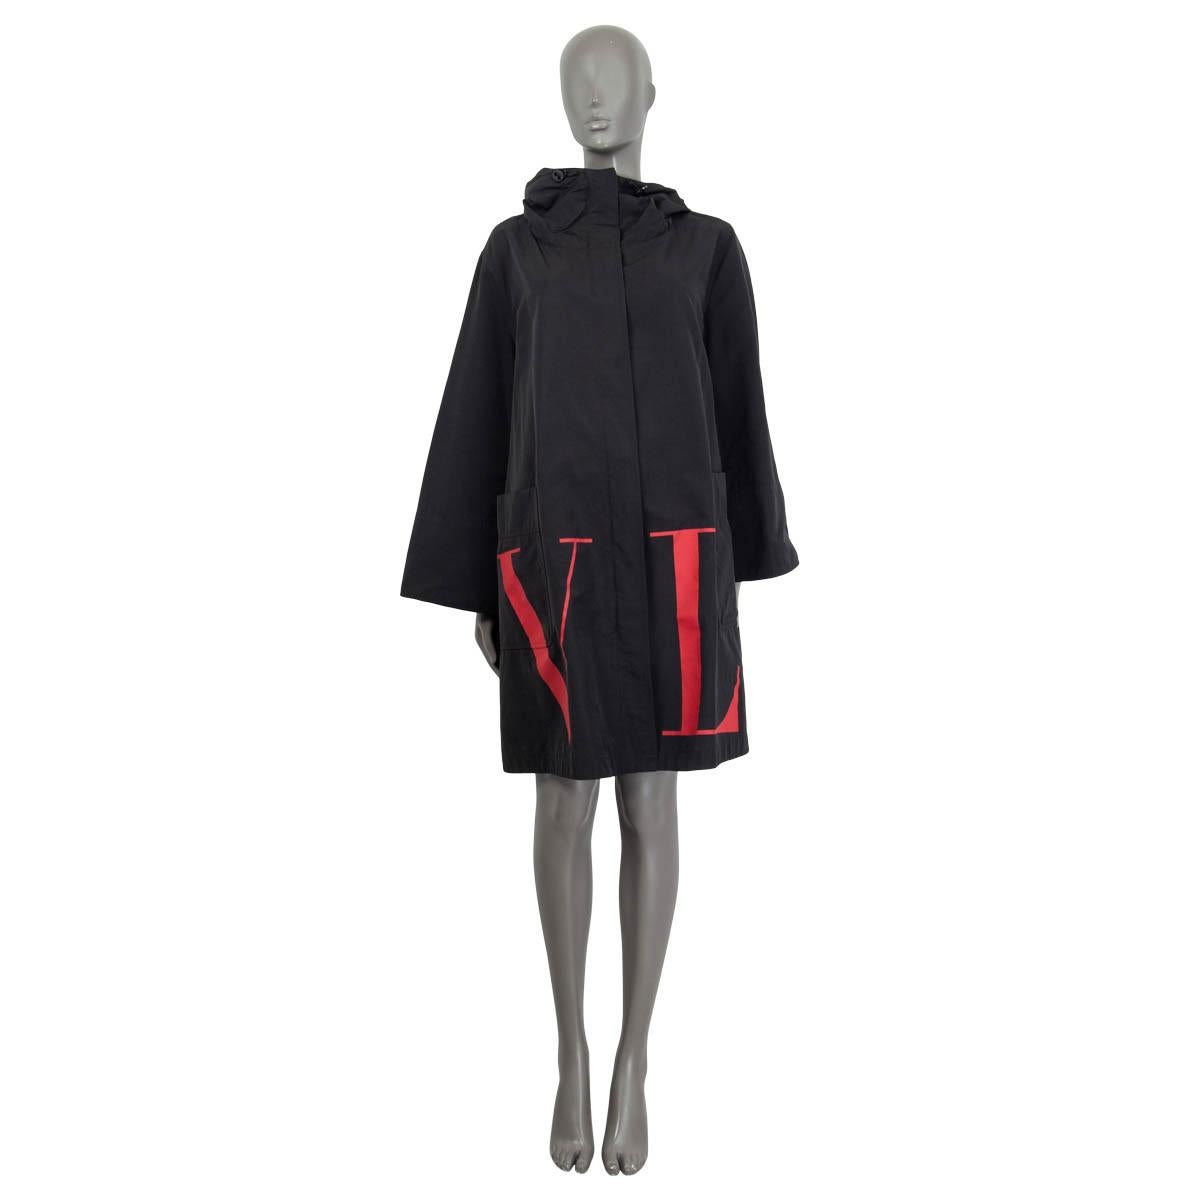 100% authentic Valentino hooded coat in black cotton (54%) and polyester (46%). Features a red VLTN logo, two patch pockets on the front and flared cuffs. Opens with seven push buttons and a zipper at the front. Pockets lined in charcoal cotton